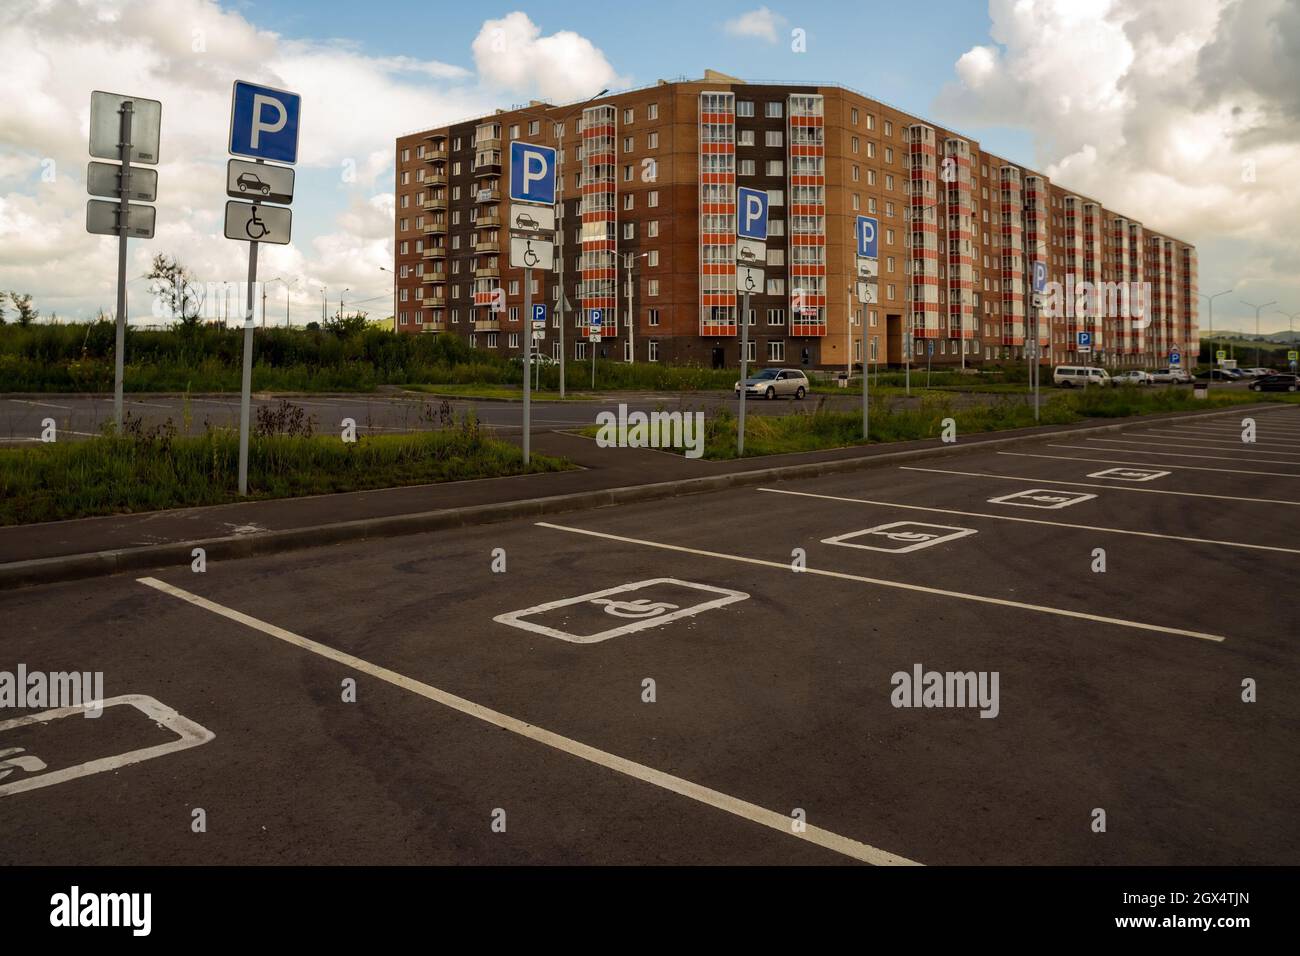 Parking spaces for disabled people with road signs, demarcated on the asphalt, in the background of a residential building. Stock Photo